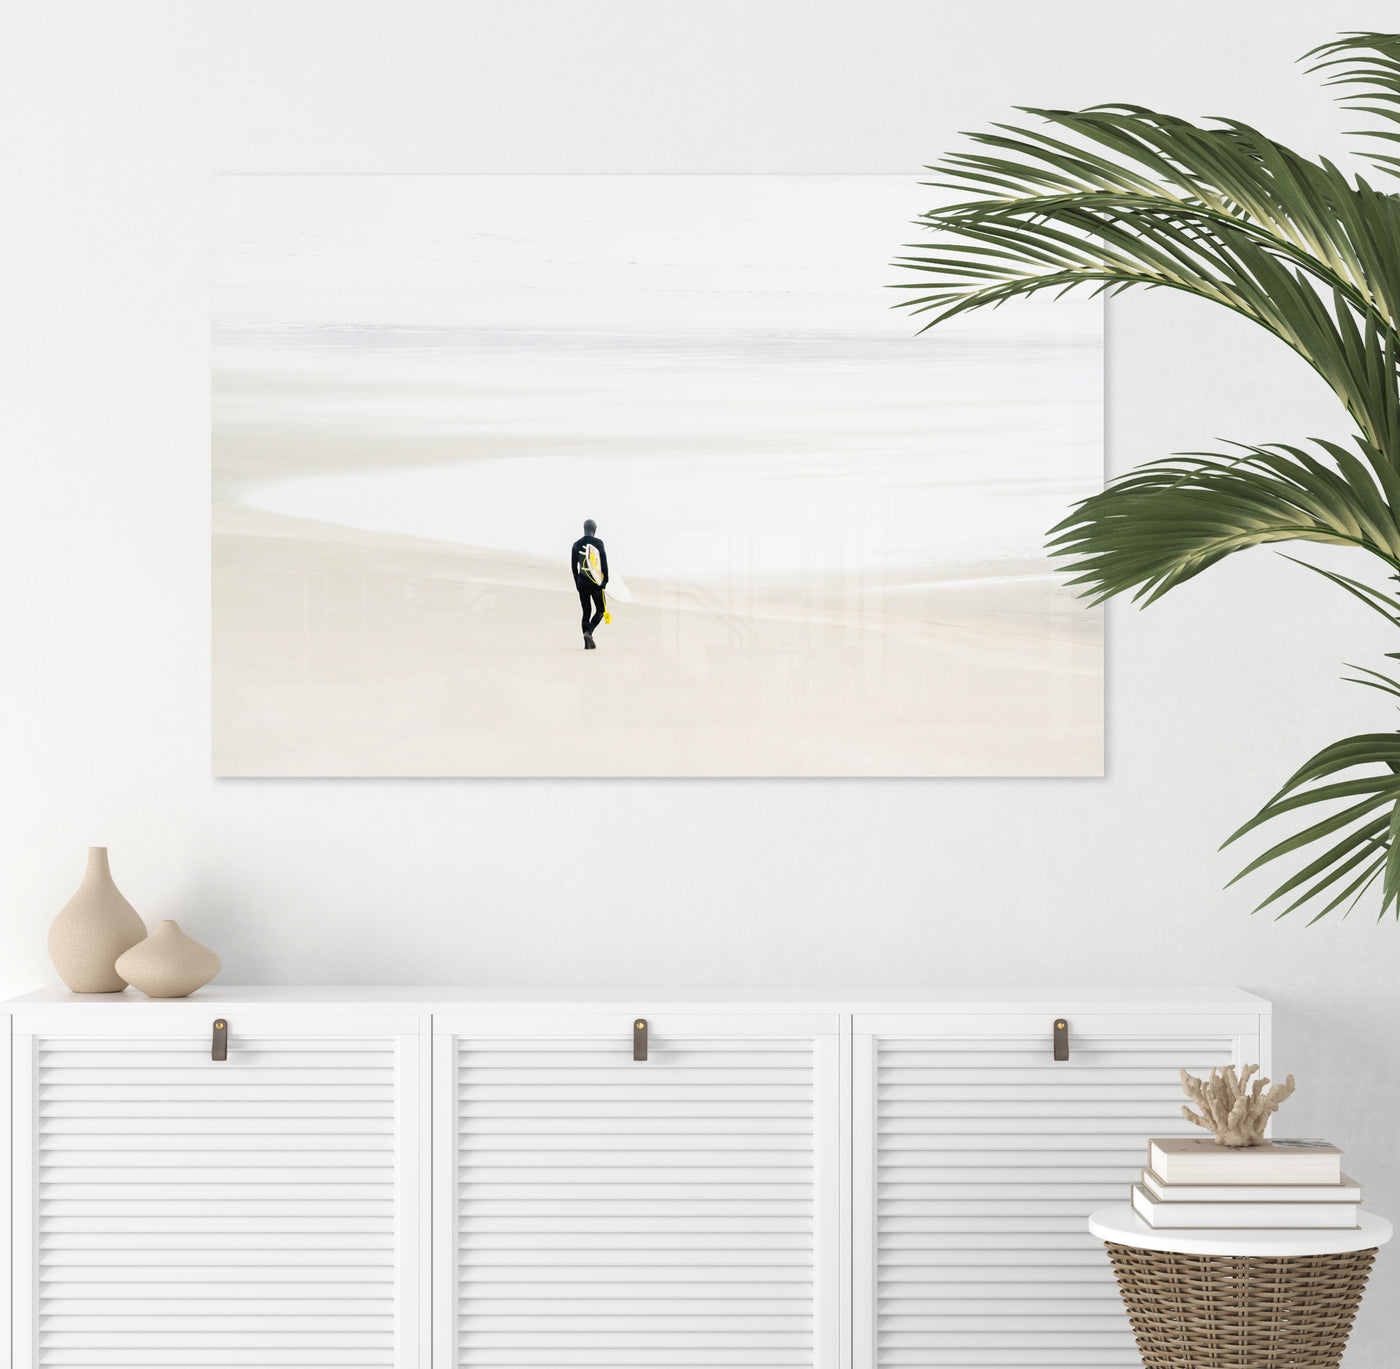 Surfer No 3 - Acrylic glass print by Cattie Coyle Photography above dresser